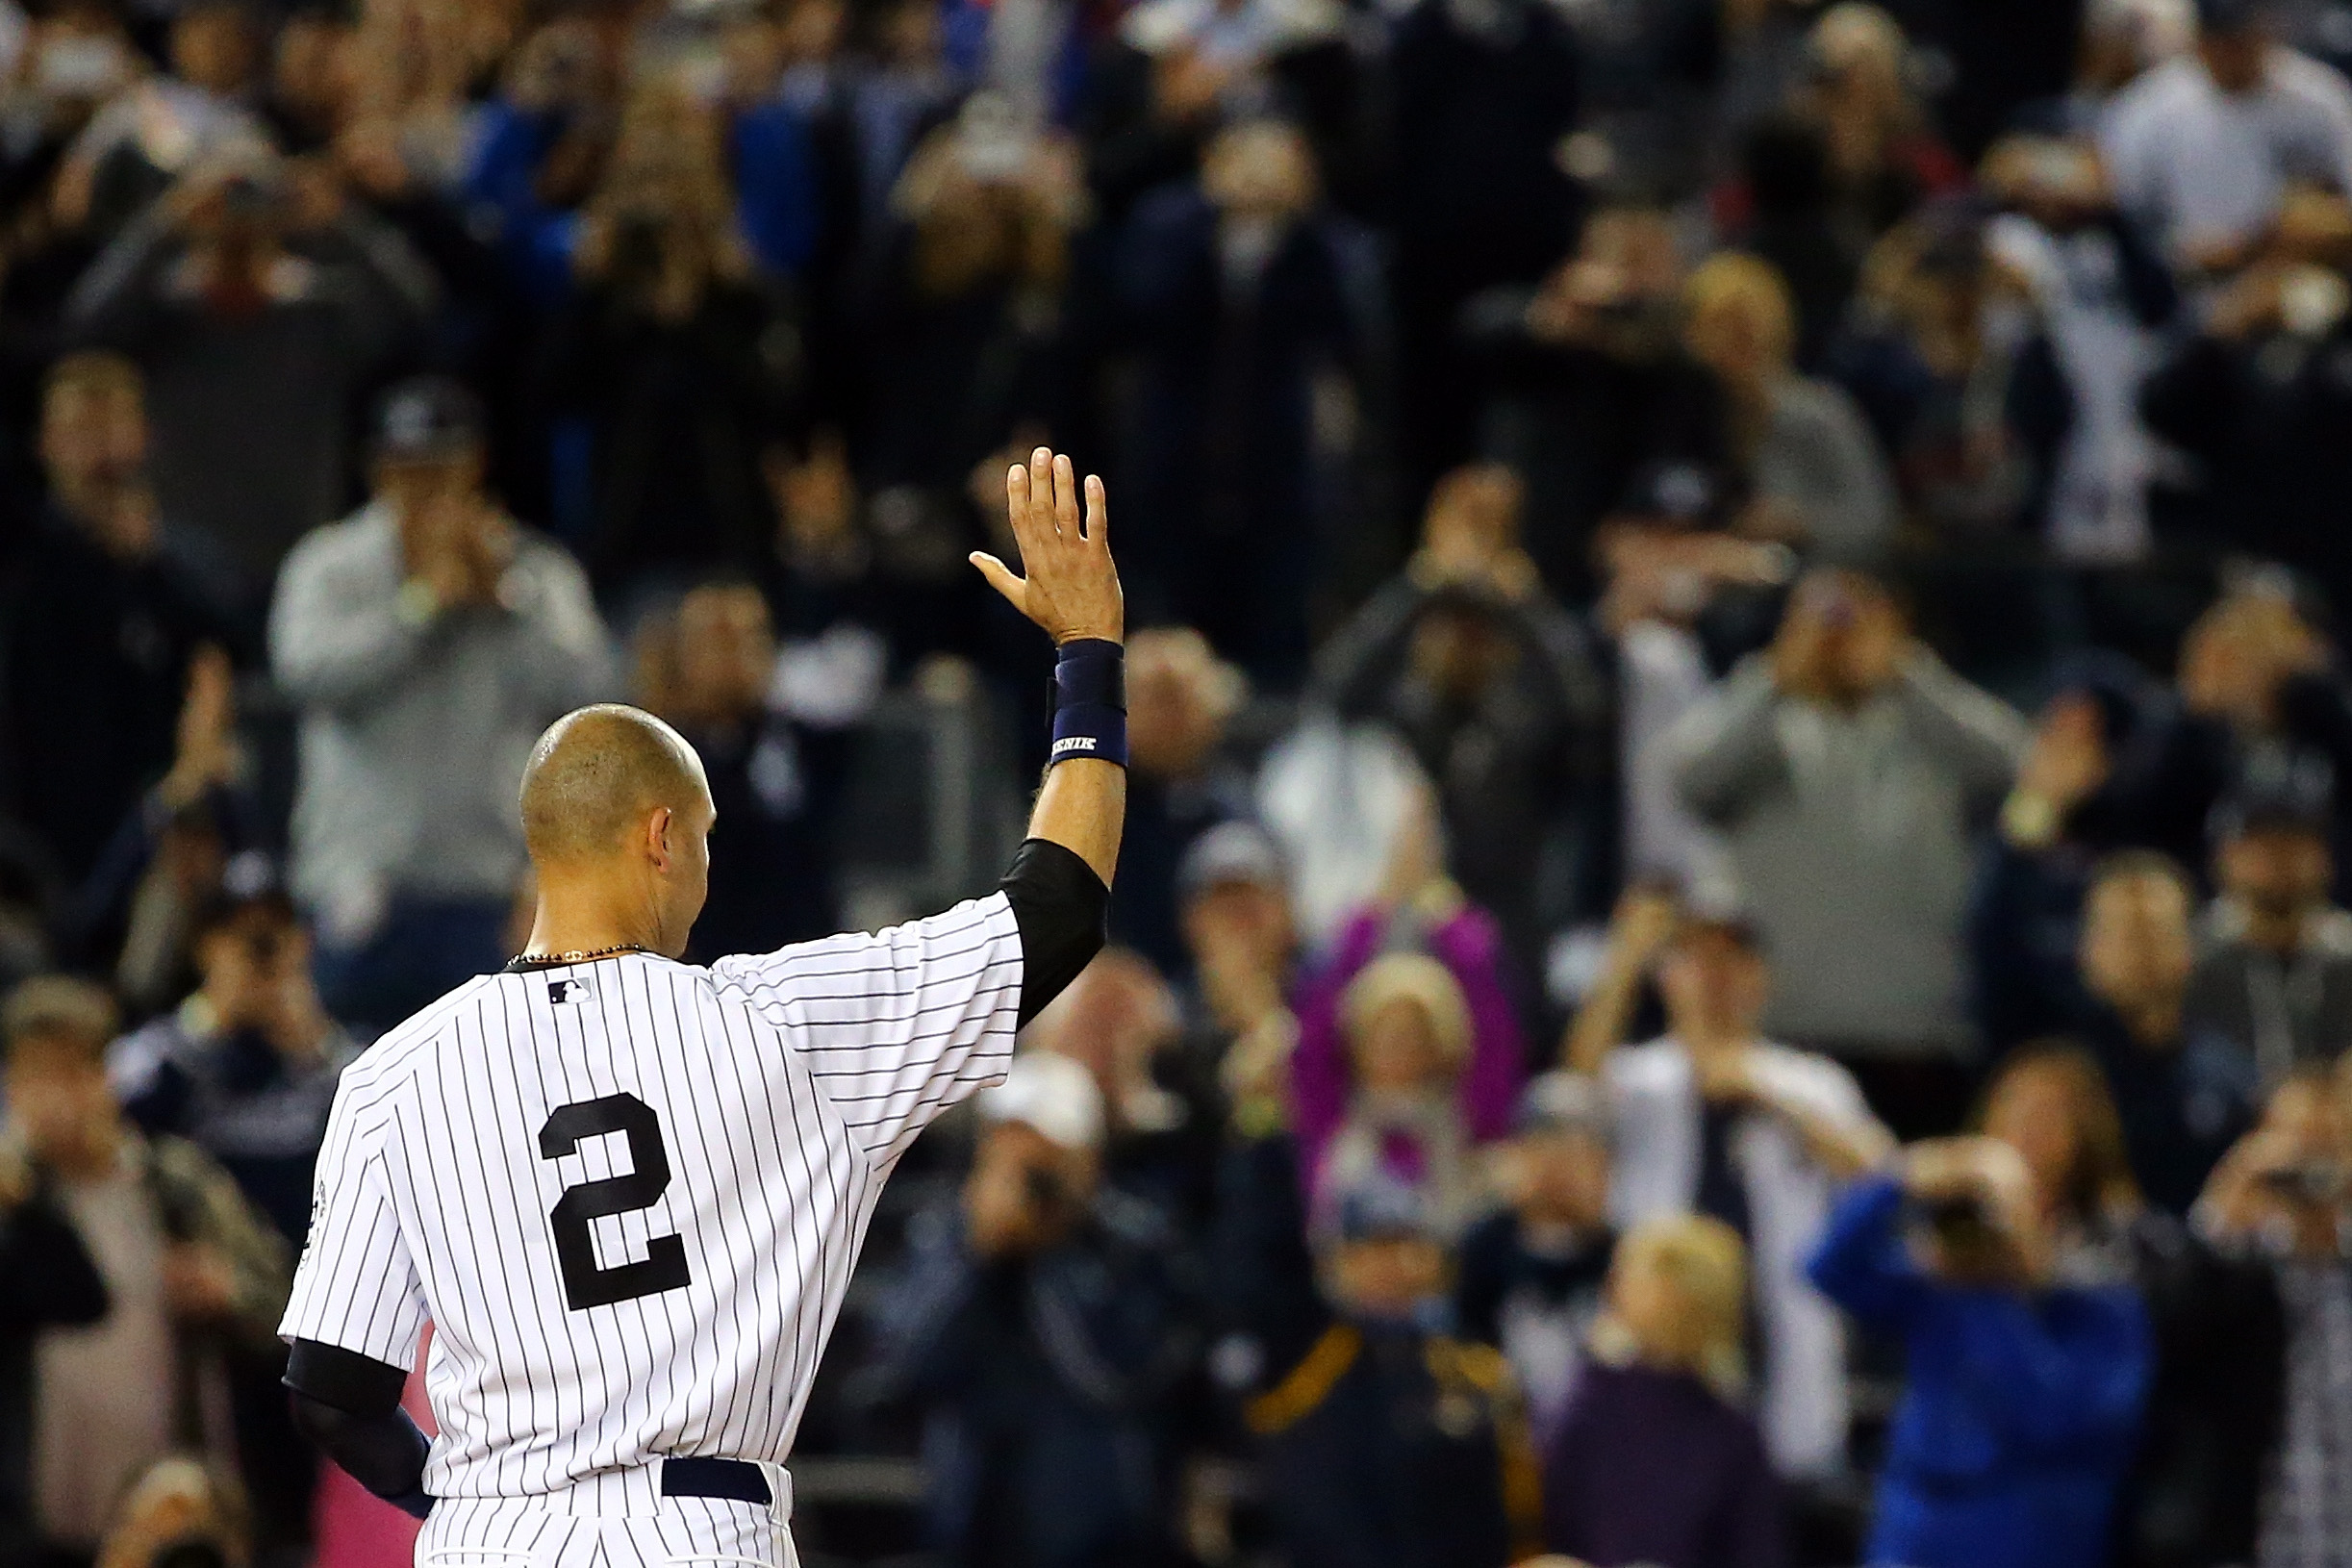 Derek Jeter gestures to the fans after a game-winning RBI hit in the ninth inning against the Baltimore Orioles in his last game ever at Yankee Stadium on September 25, 2014.  (Photo by Al Bello/Getty Images)